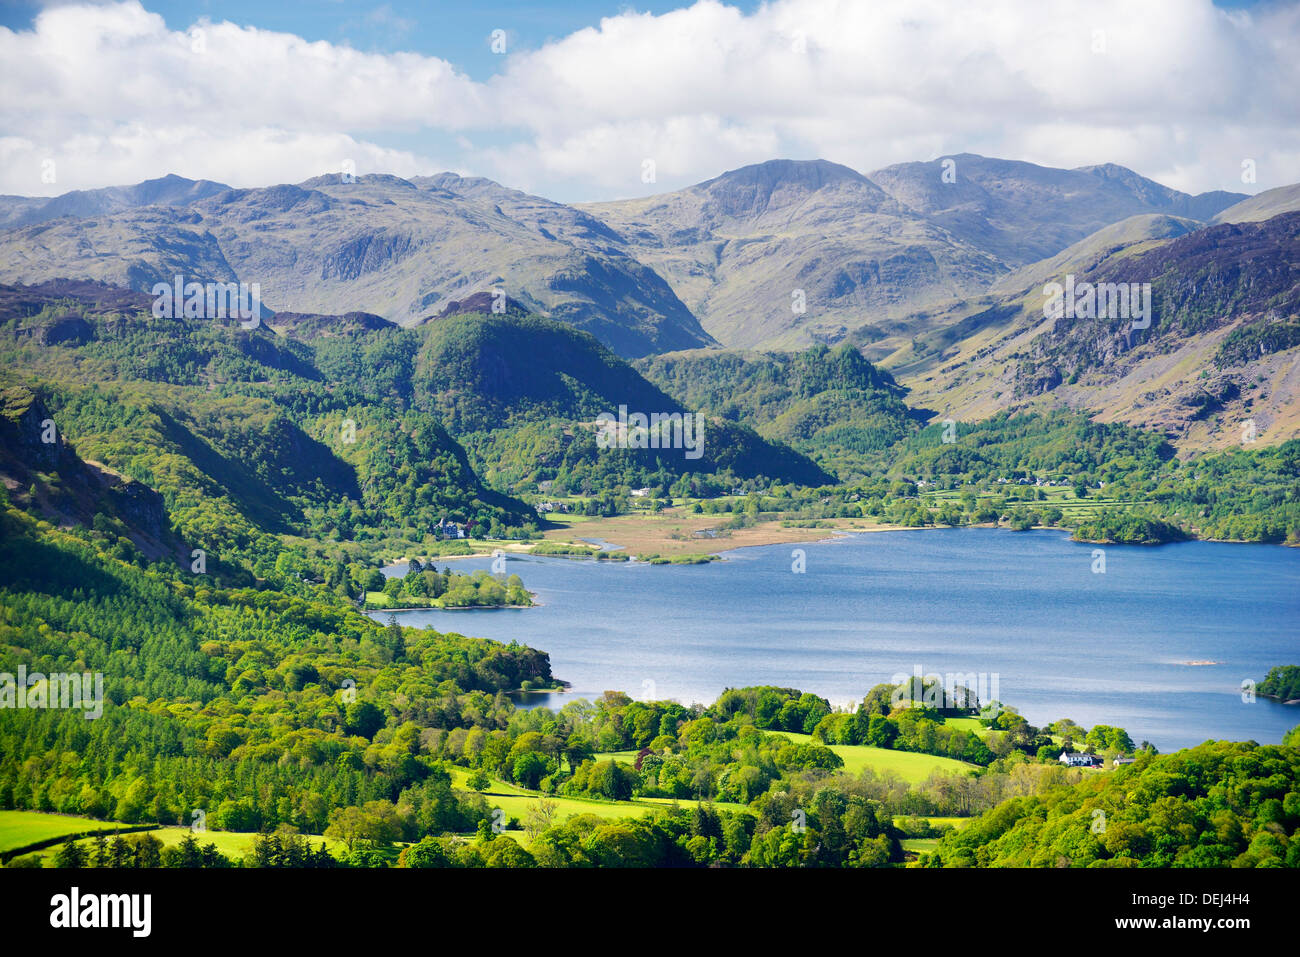 Lake District National Park, Cumbria, England. South from above Keswick across Derwentwater to Borrowdale and the central fells Stock Photo